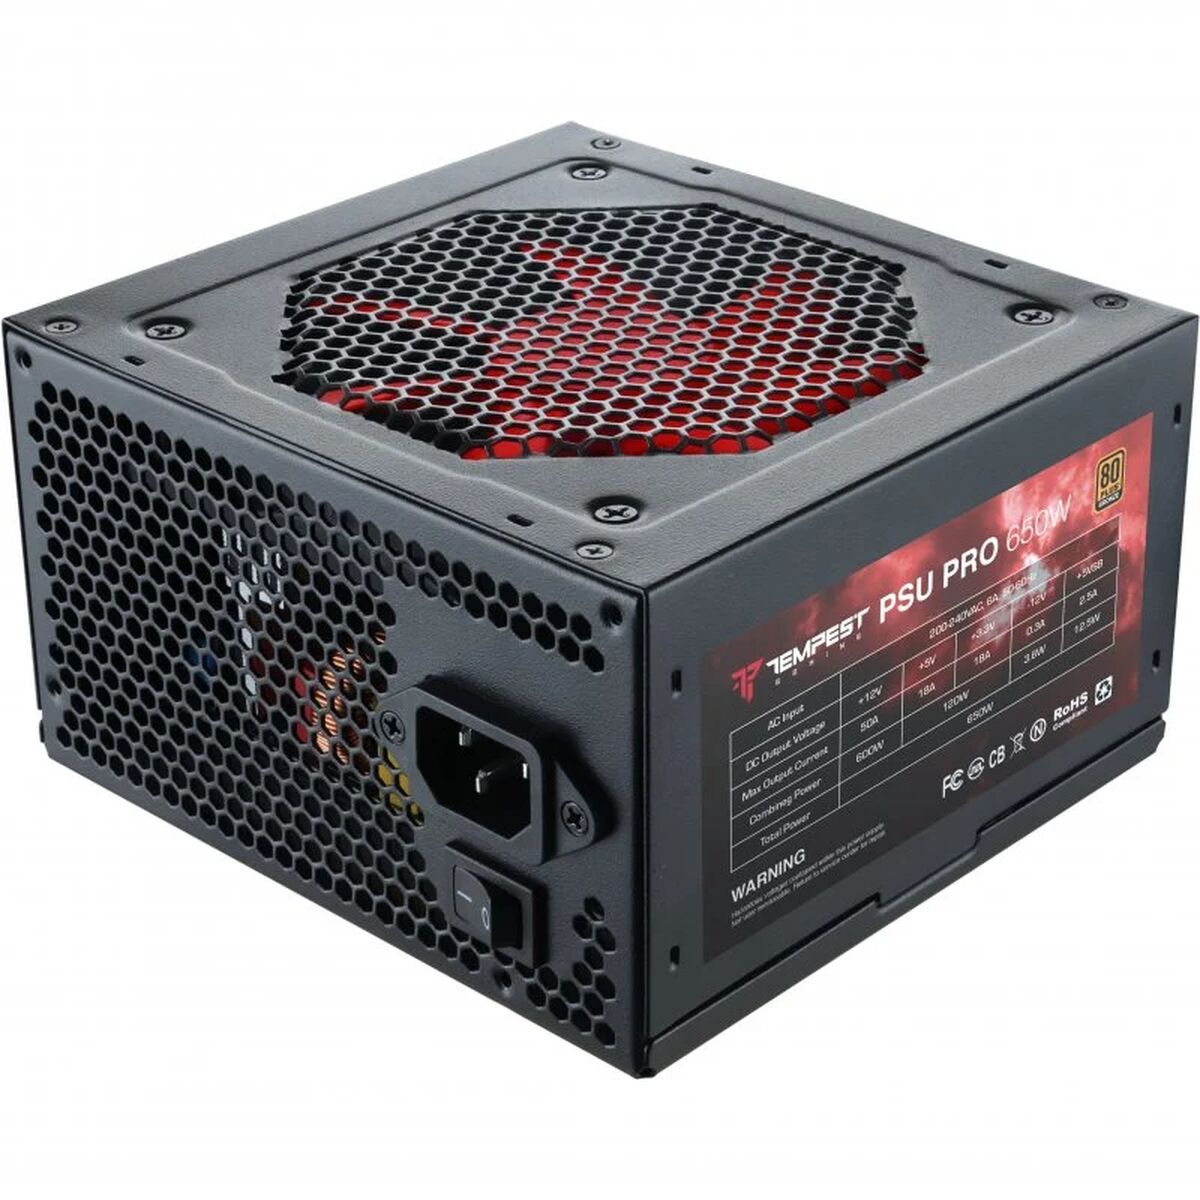 Source d'alimentation Gaming Tempest PSU PRO 650W